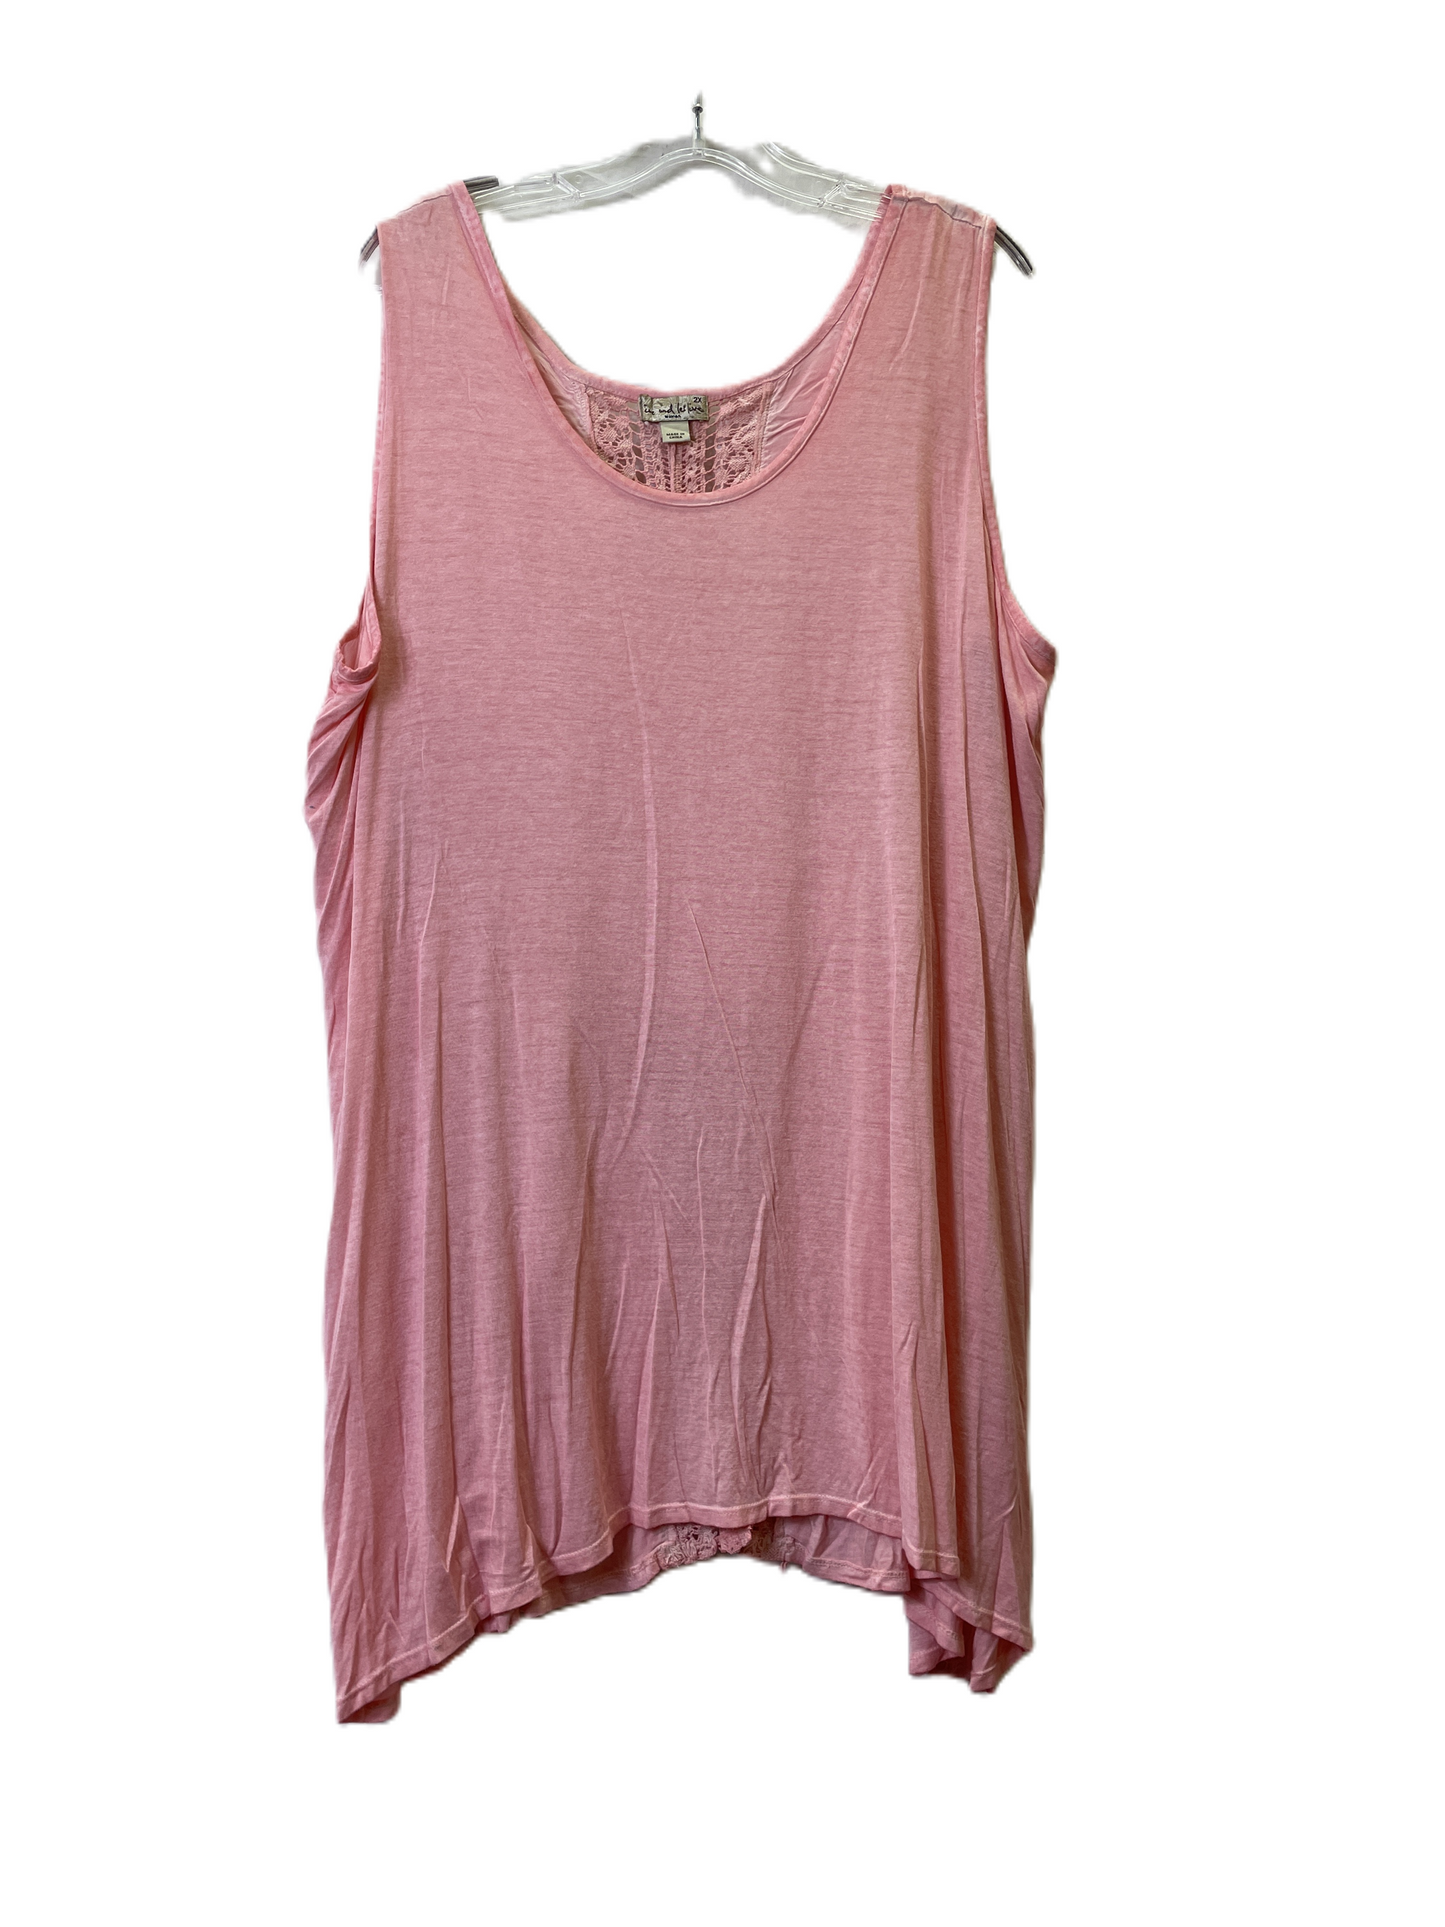 Pink Top Short Sleeve By Live And Let Live, Size: 2x